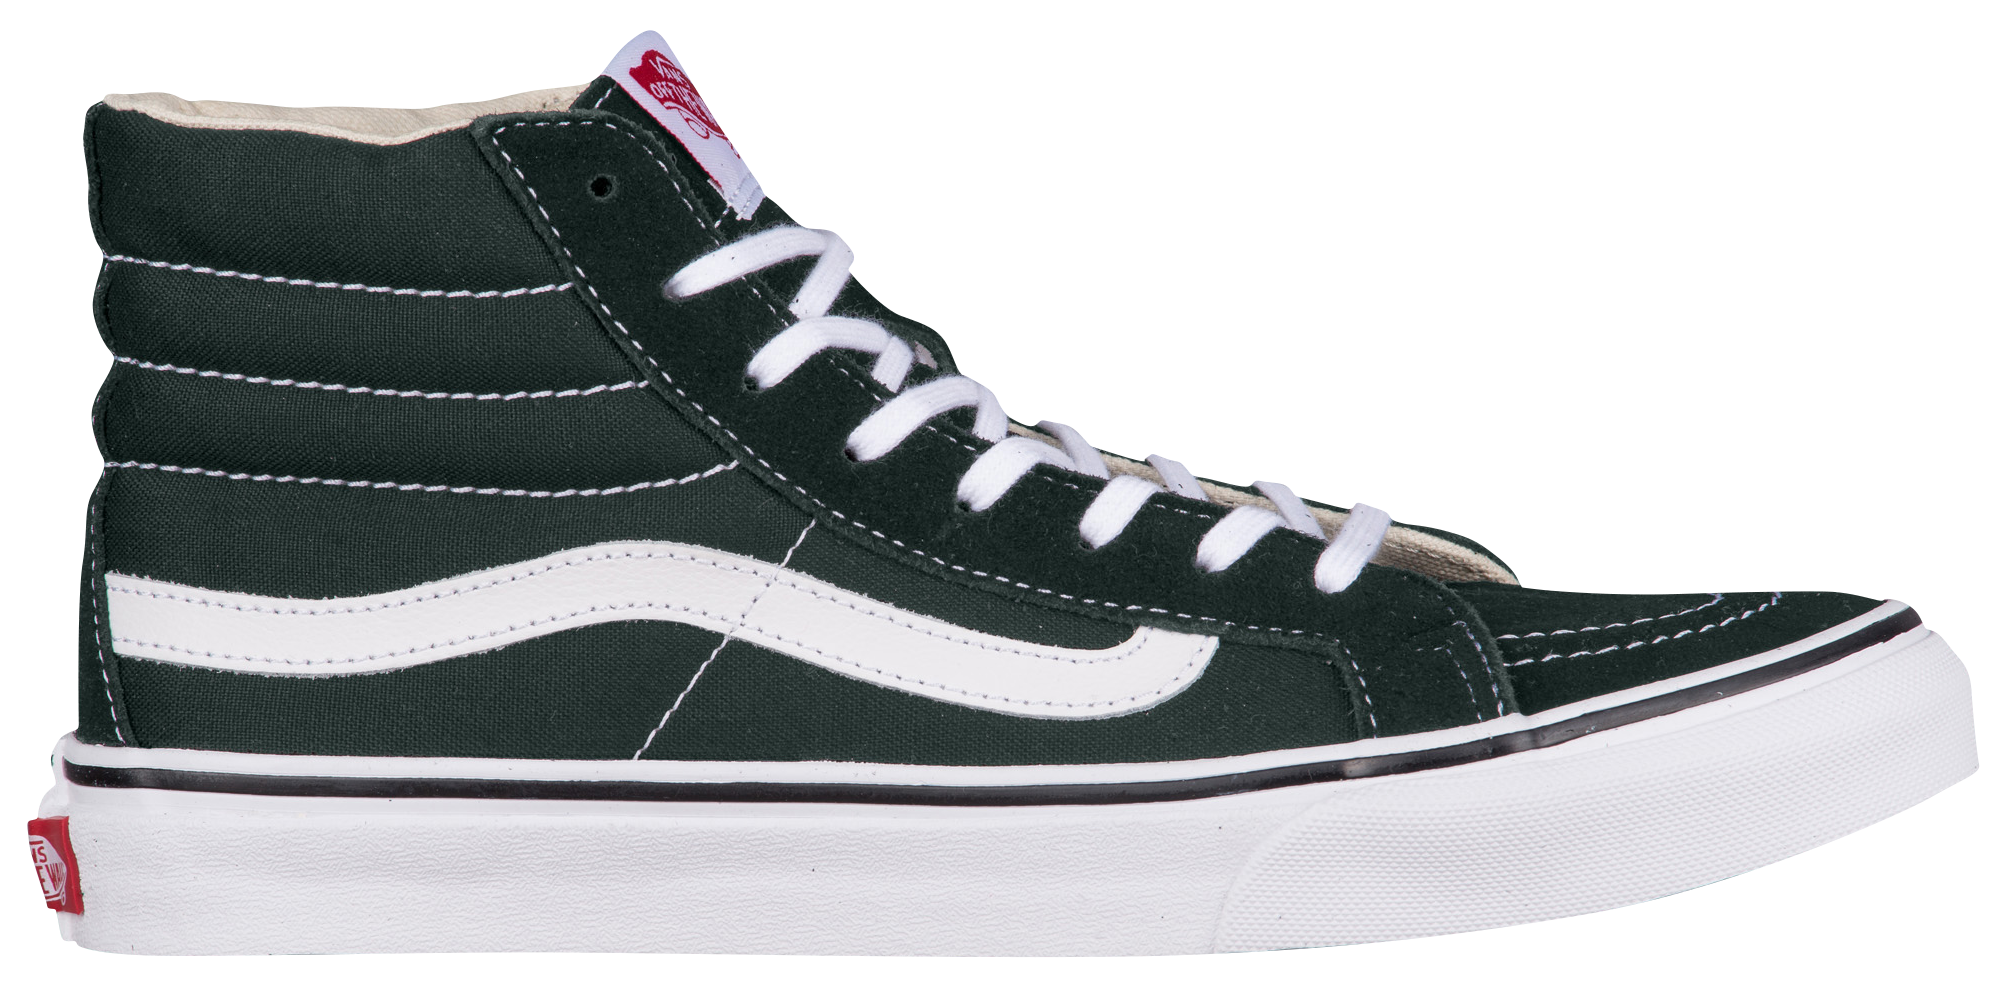 Asino legna guardiano vans shoes price 